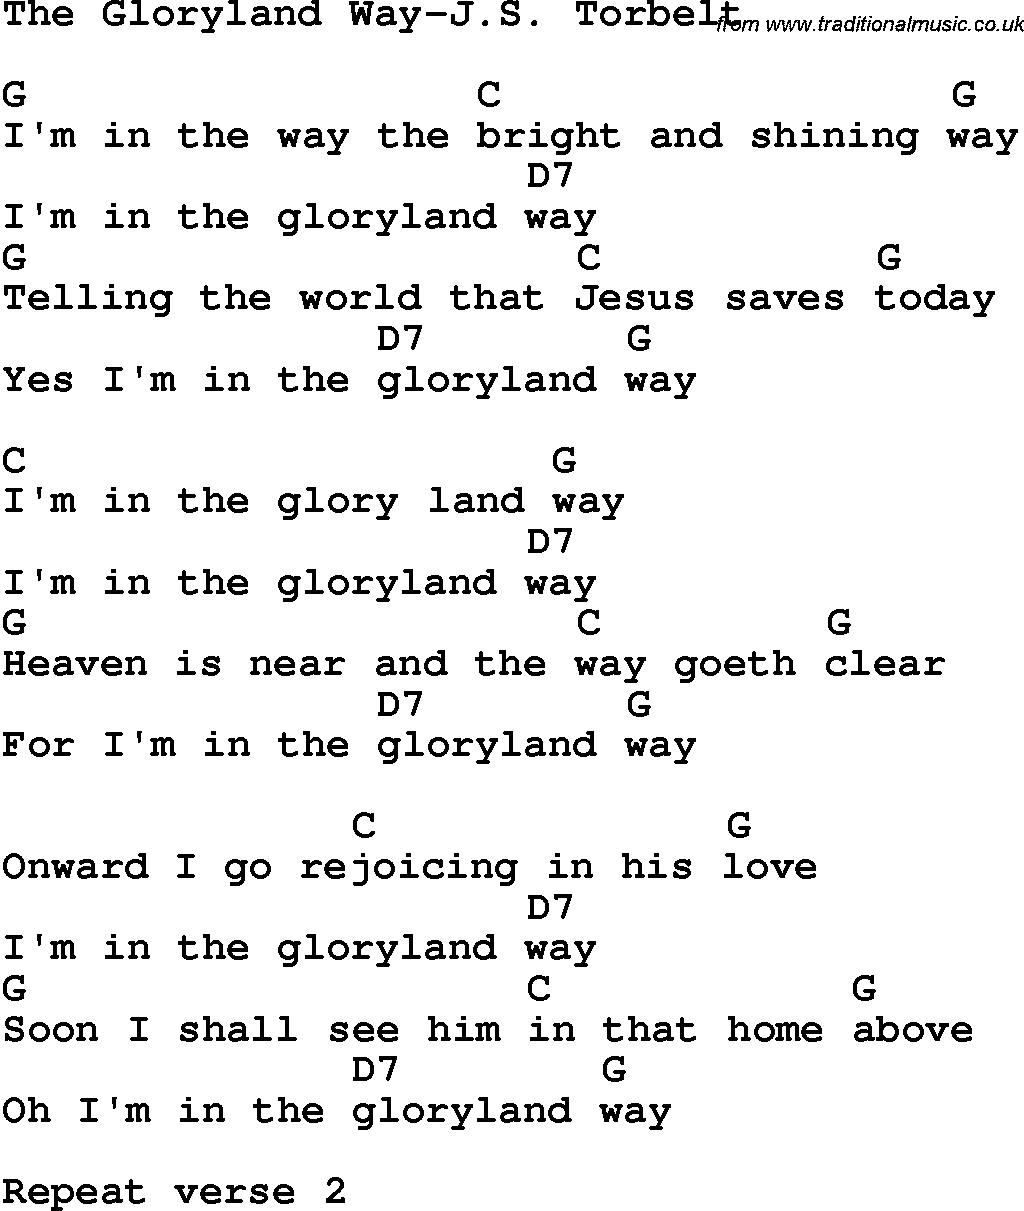 Country, Southern and Bluegrass Gospel Song The Gloryland Way-J S Torbelt lyrics and chords